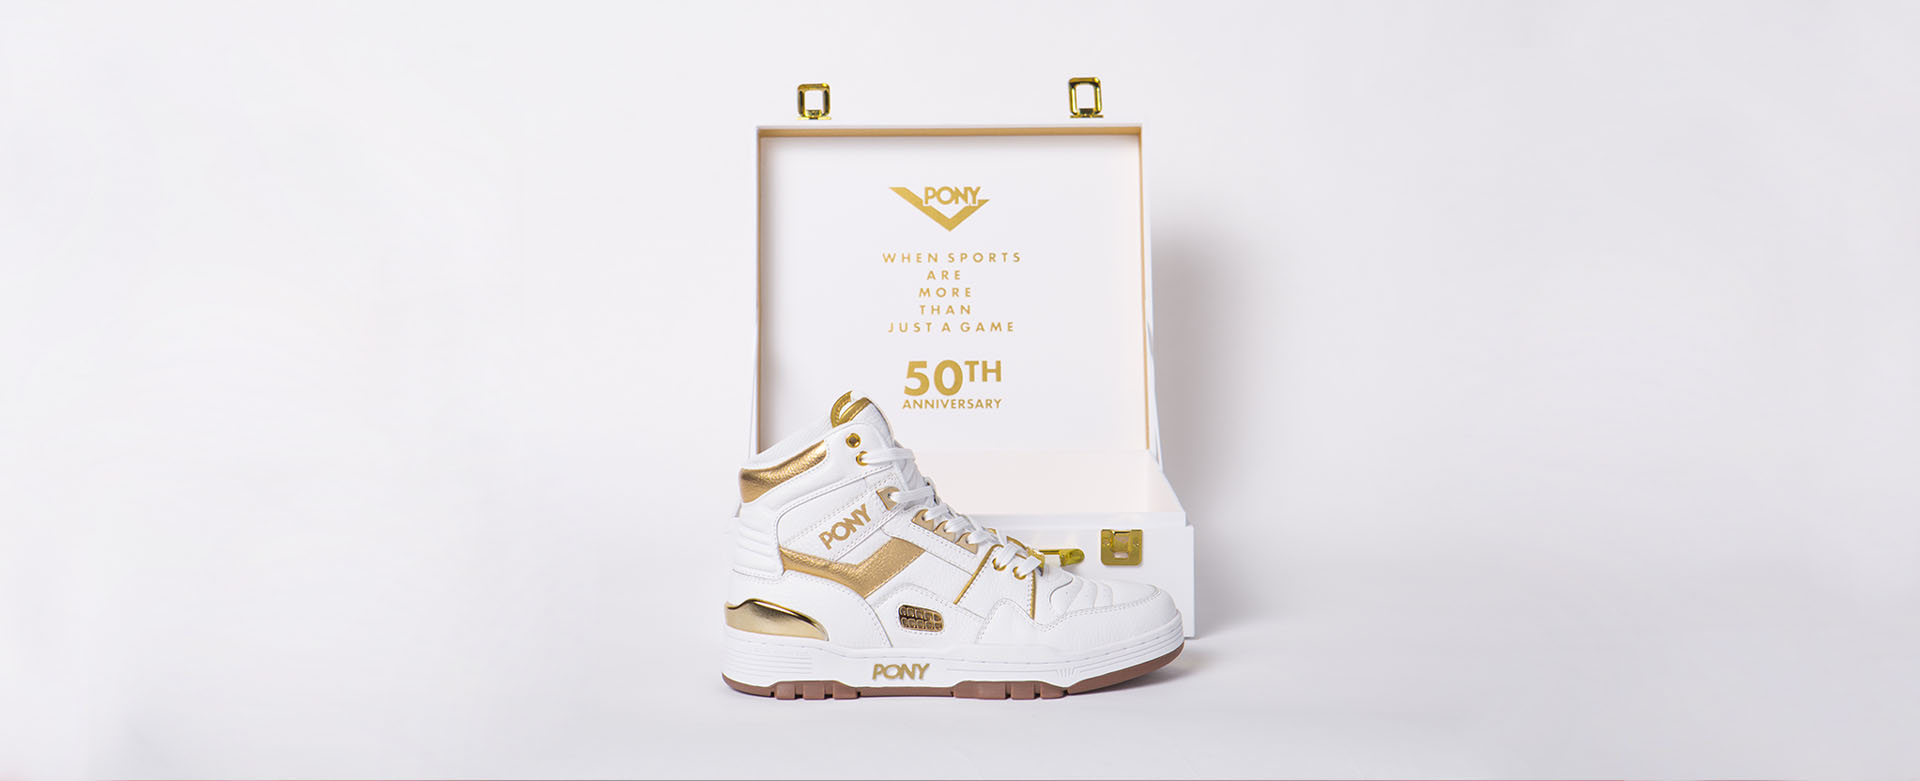 HERITAGE SNEAKER BRAND PONY CELEBRATES ITS 50th ANNIVERSARY WITH A ...